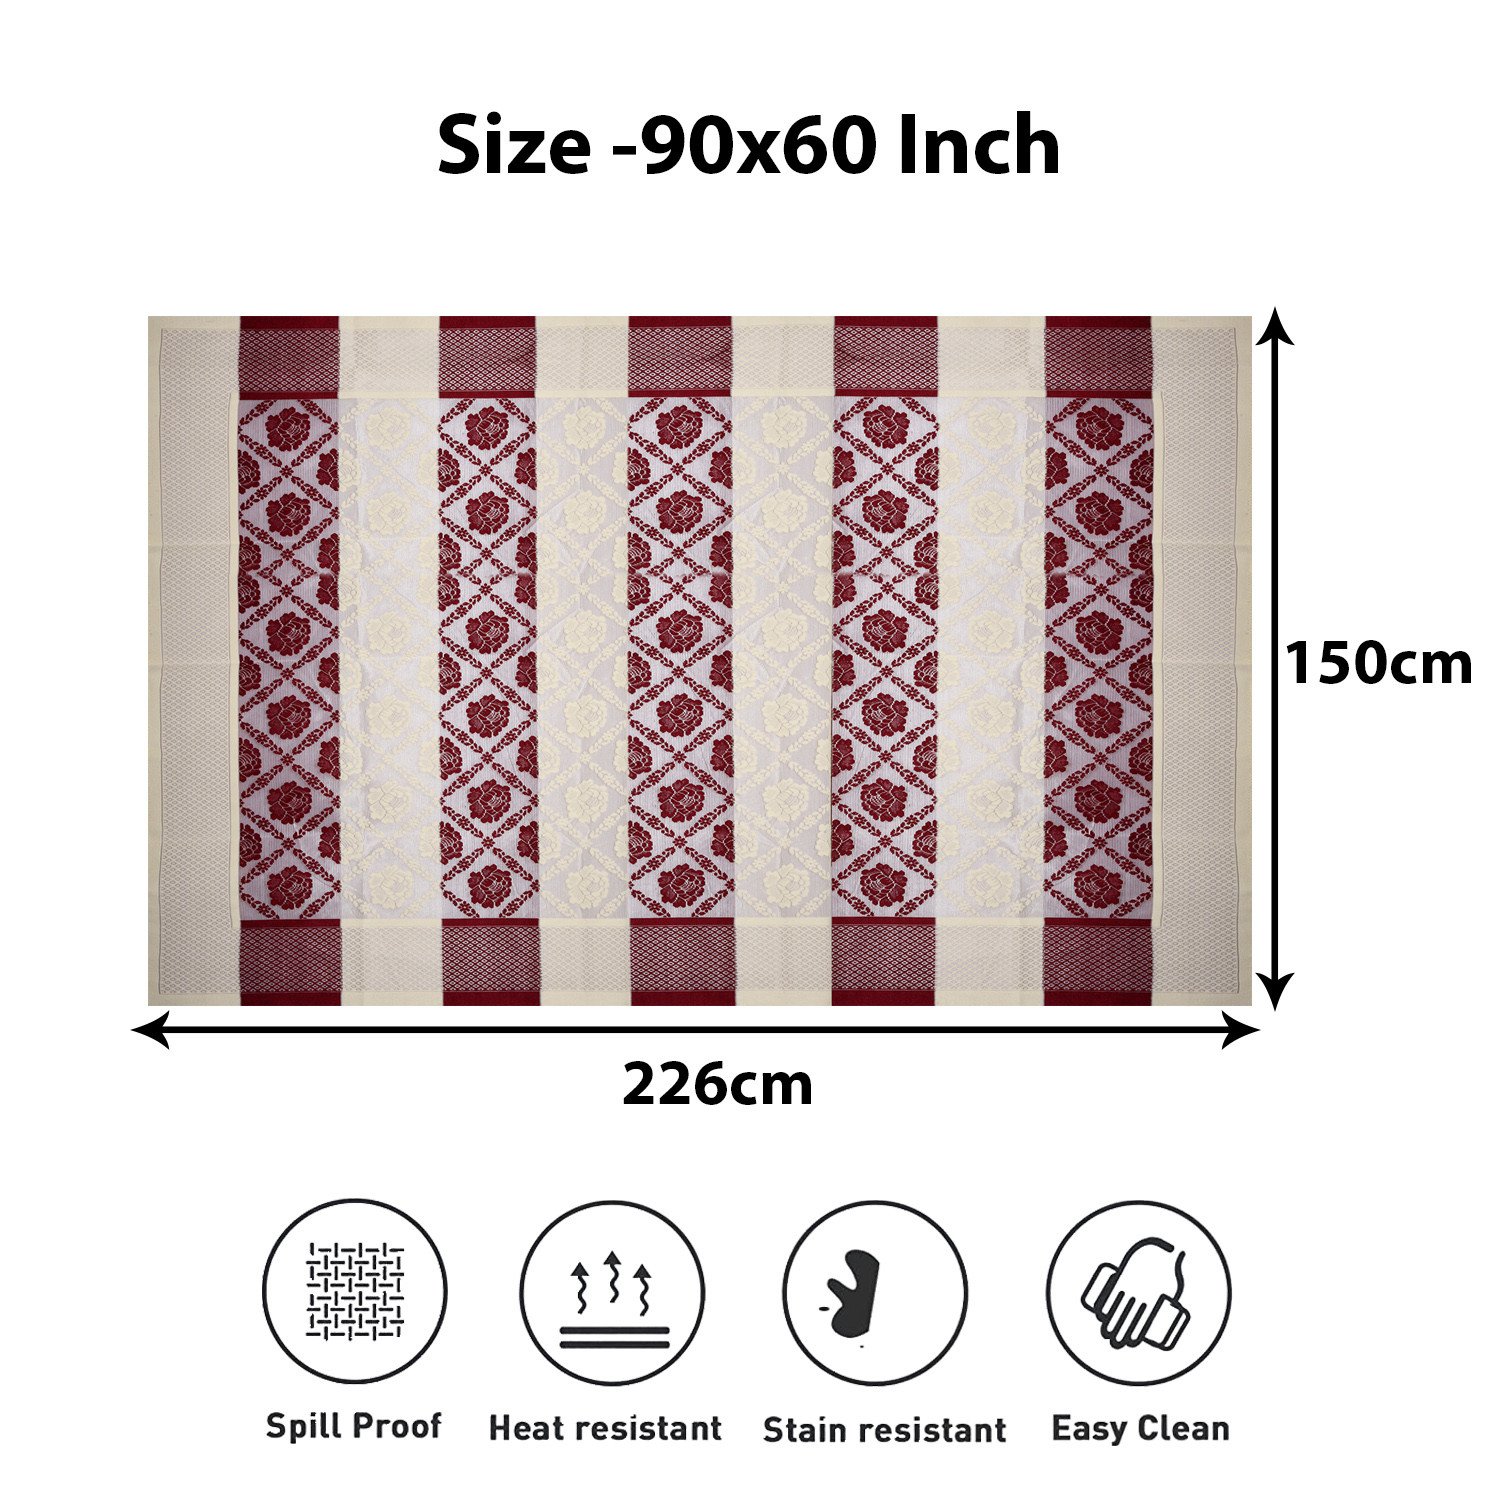 Kuber Industries Dining Table Cover | Cotton Net Maroon Flower Patta Pattern | Tablecloth for Home Décor | Tablecloth for Dining Area | 60X90 Inch | Cream